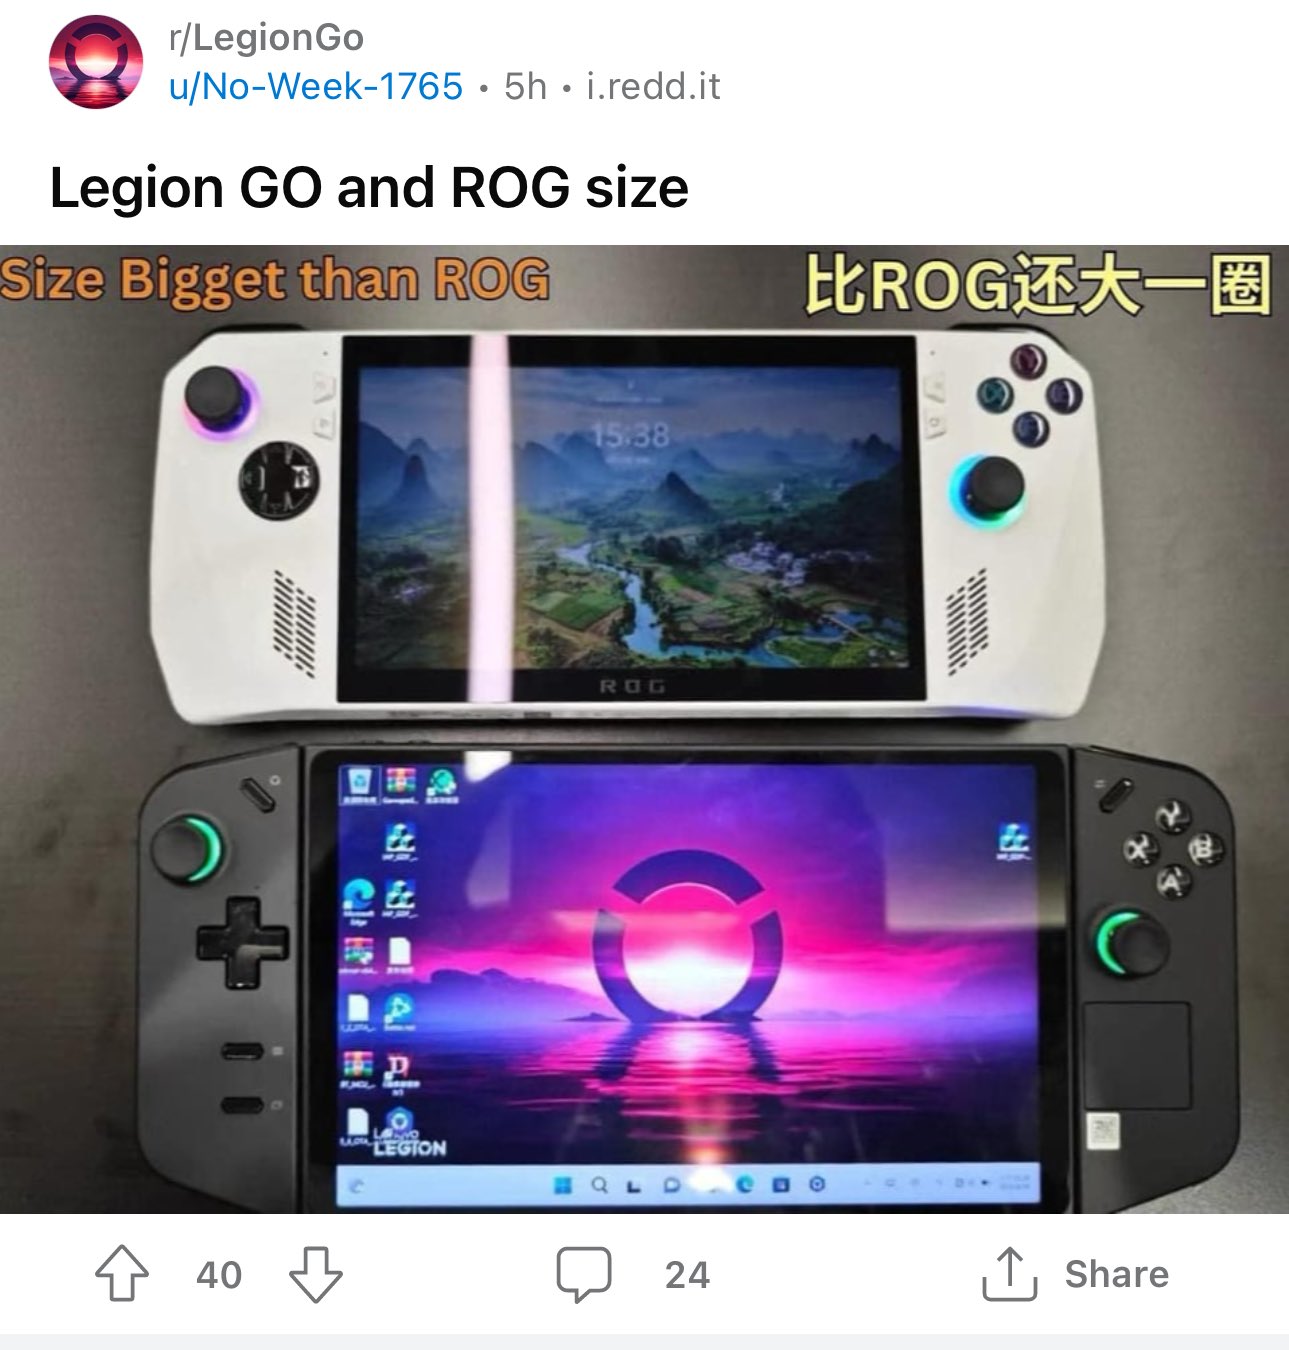 Thoughts on this Dock for Legion Go? : r/LegionGo